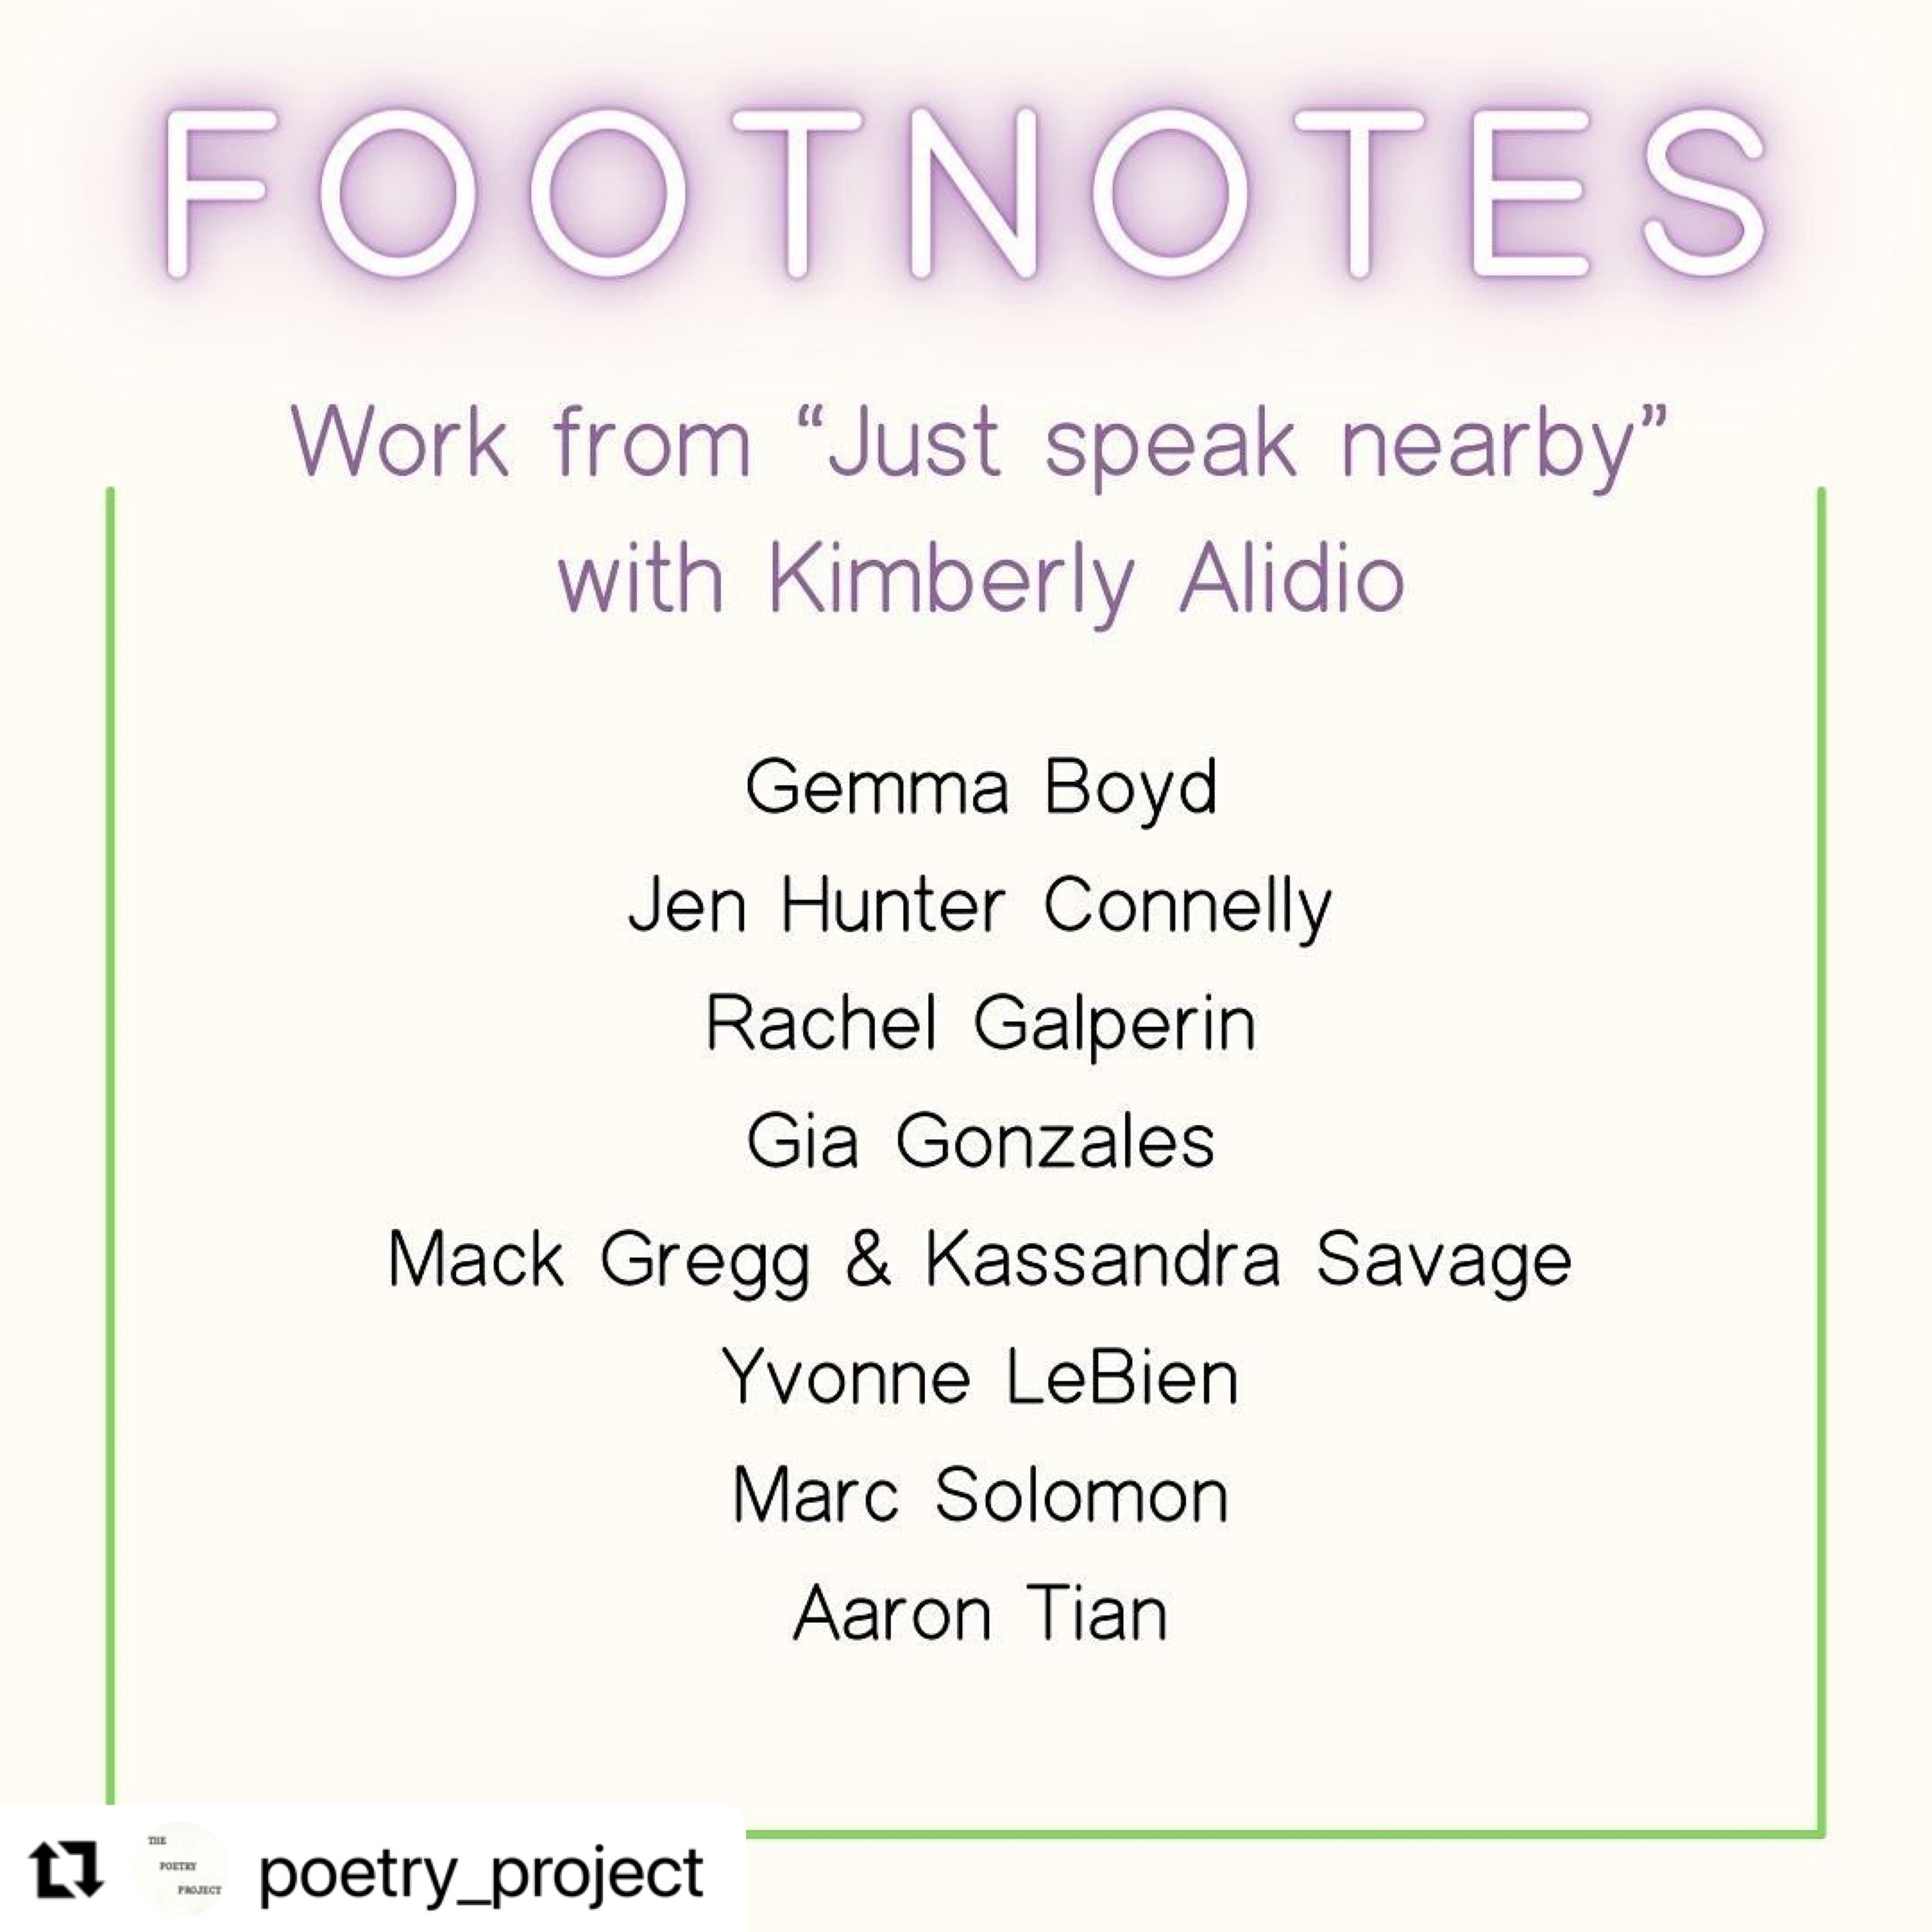  Participants’ work is published on The Poetry Project’s  Footnotes  publication.  